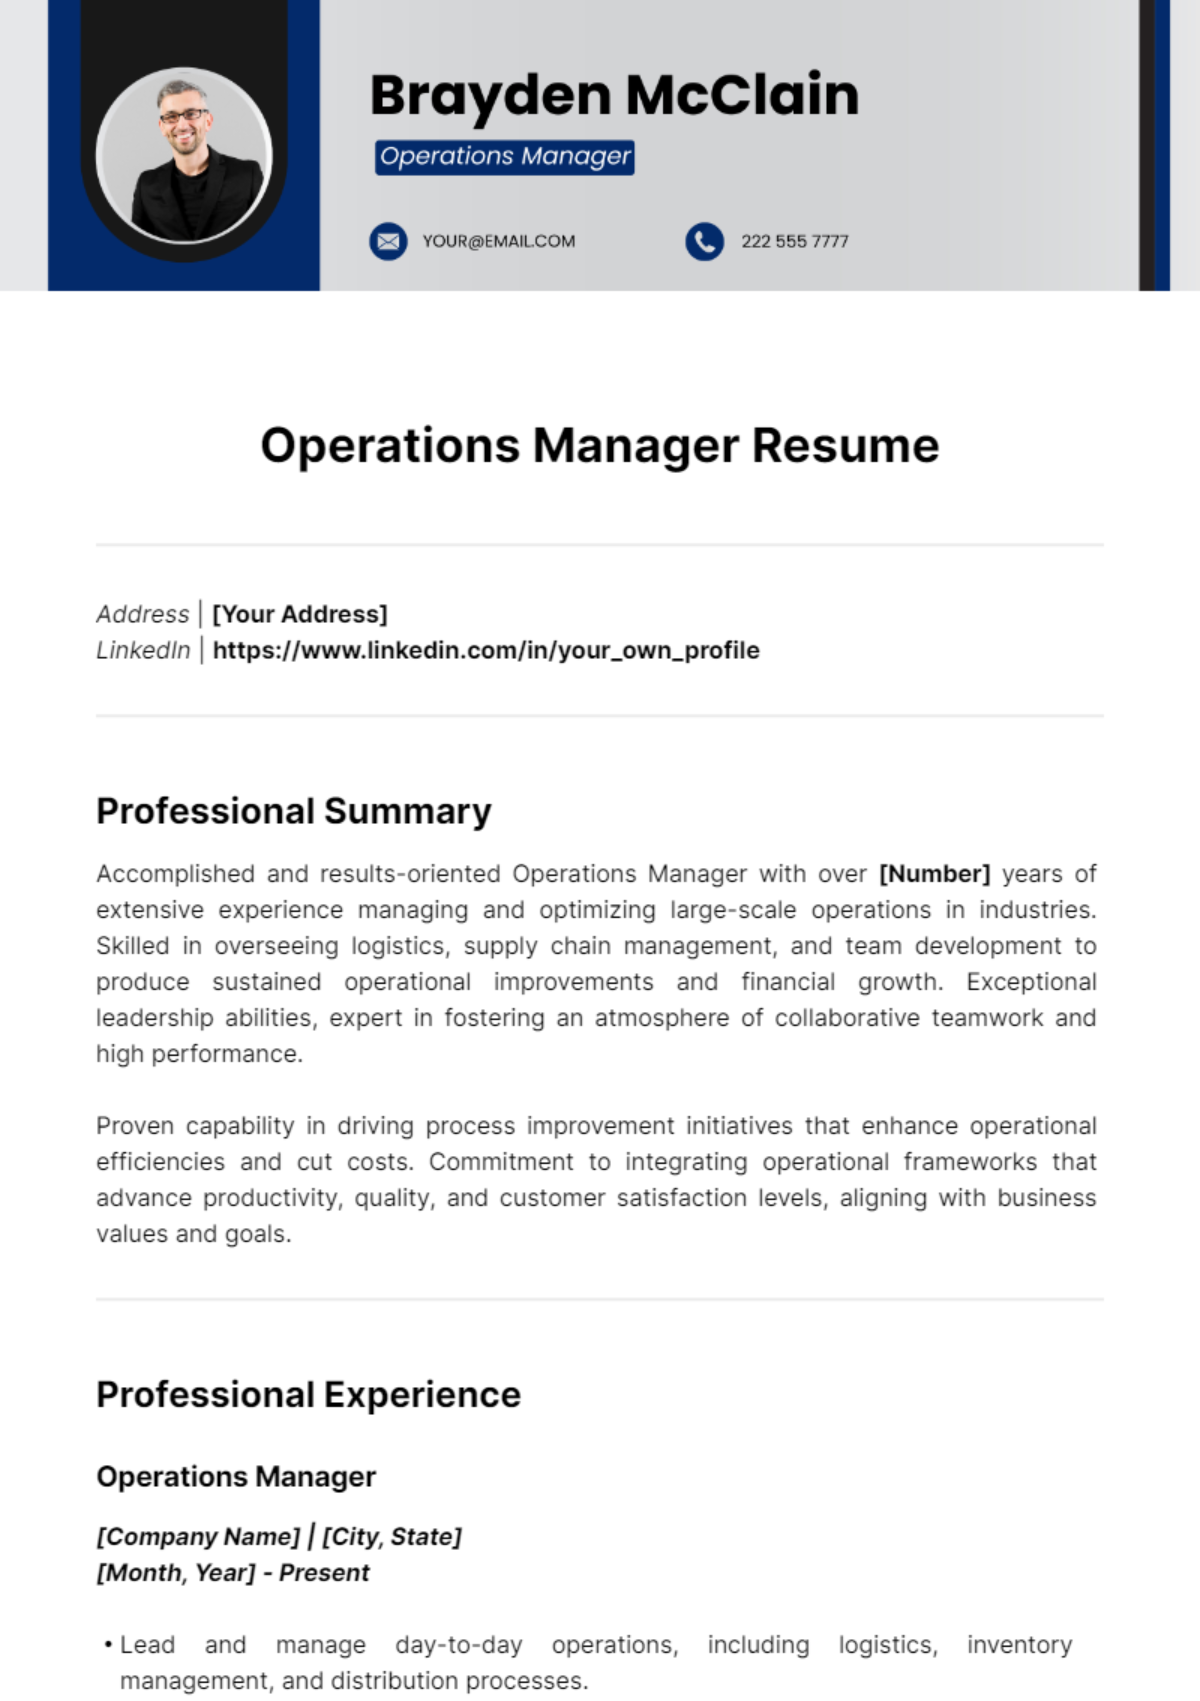 Operations Manager Resume Template